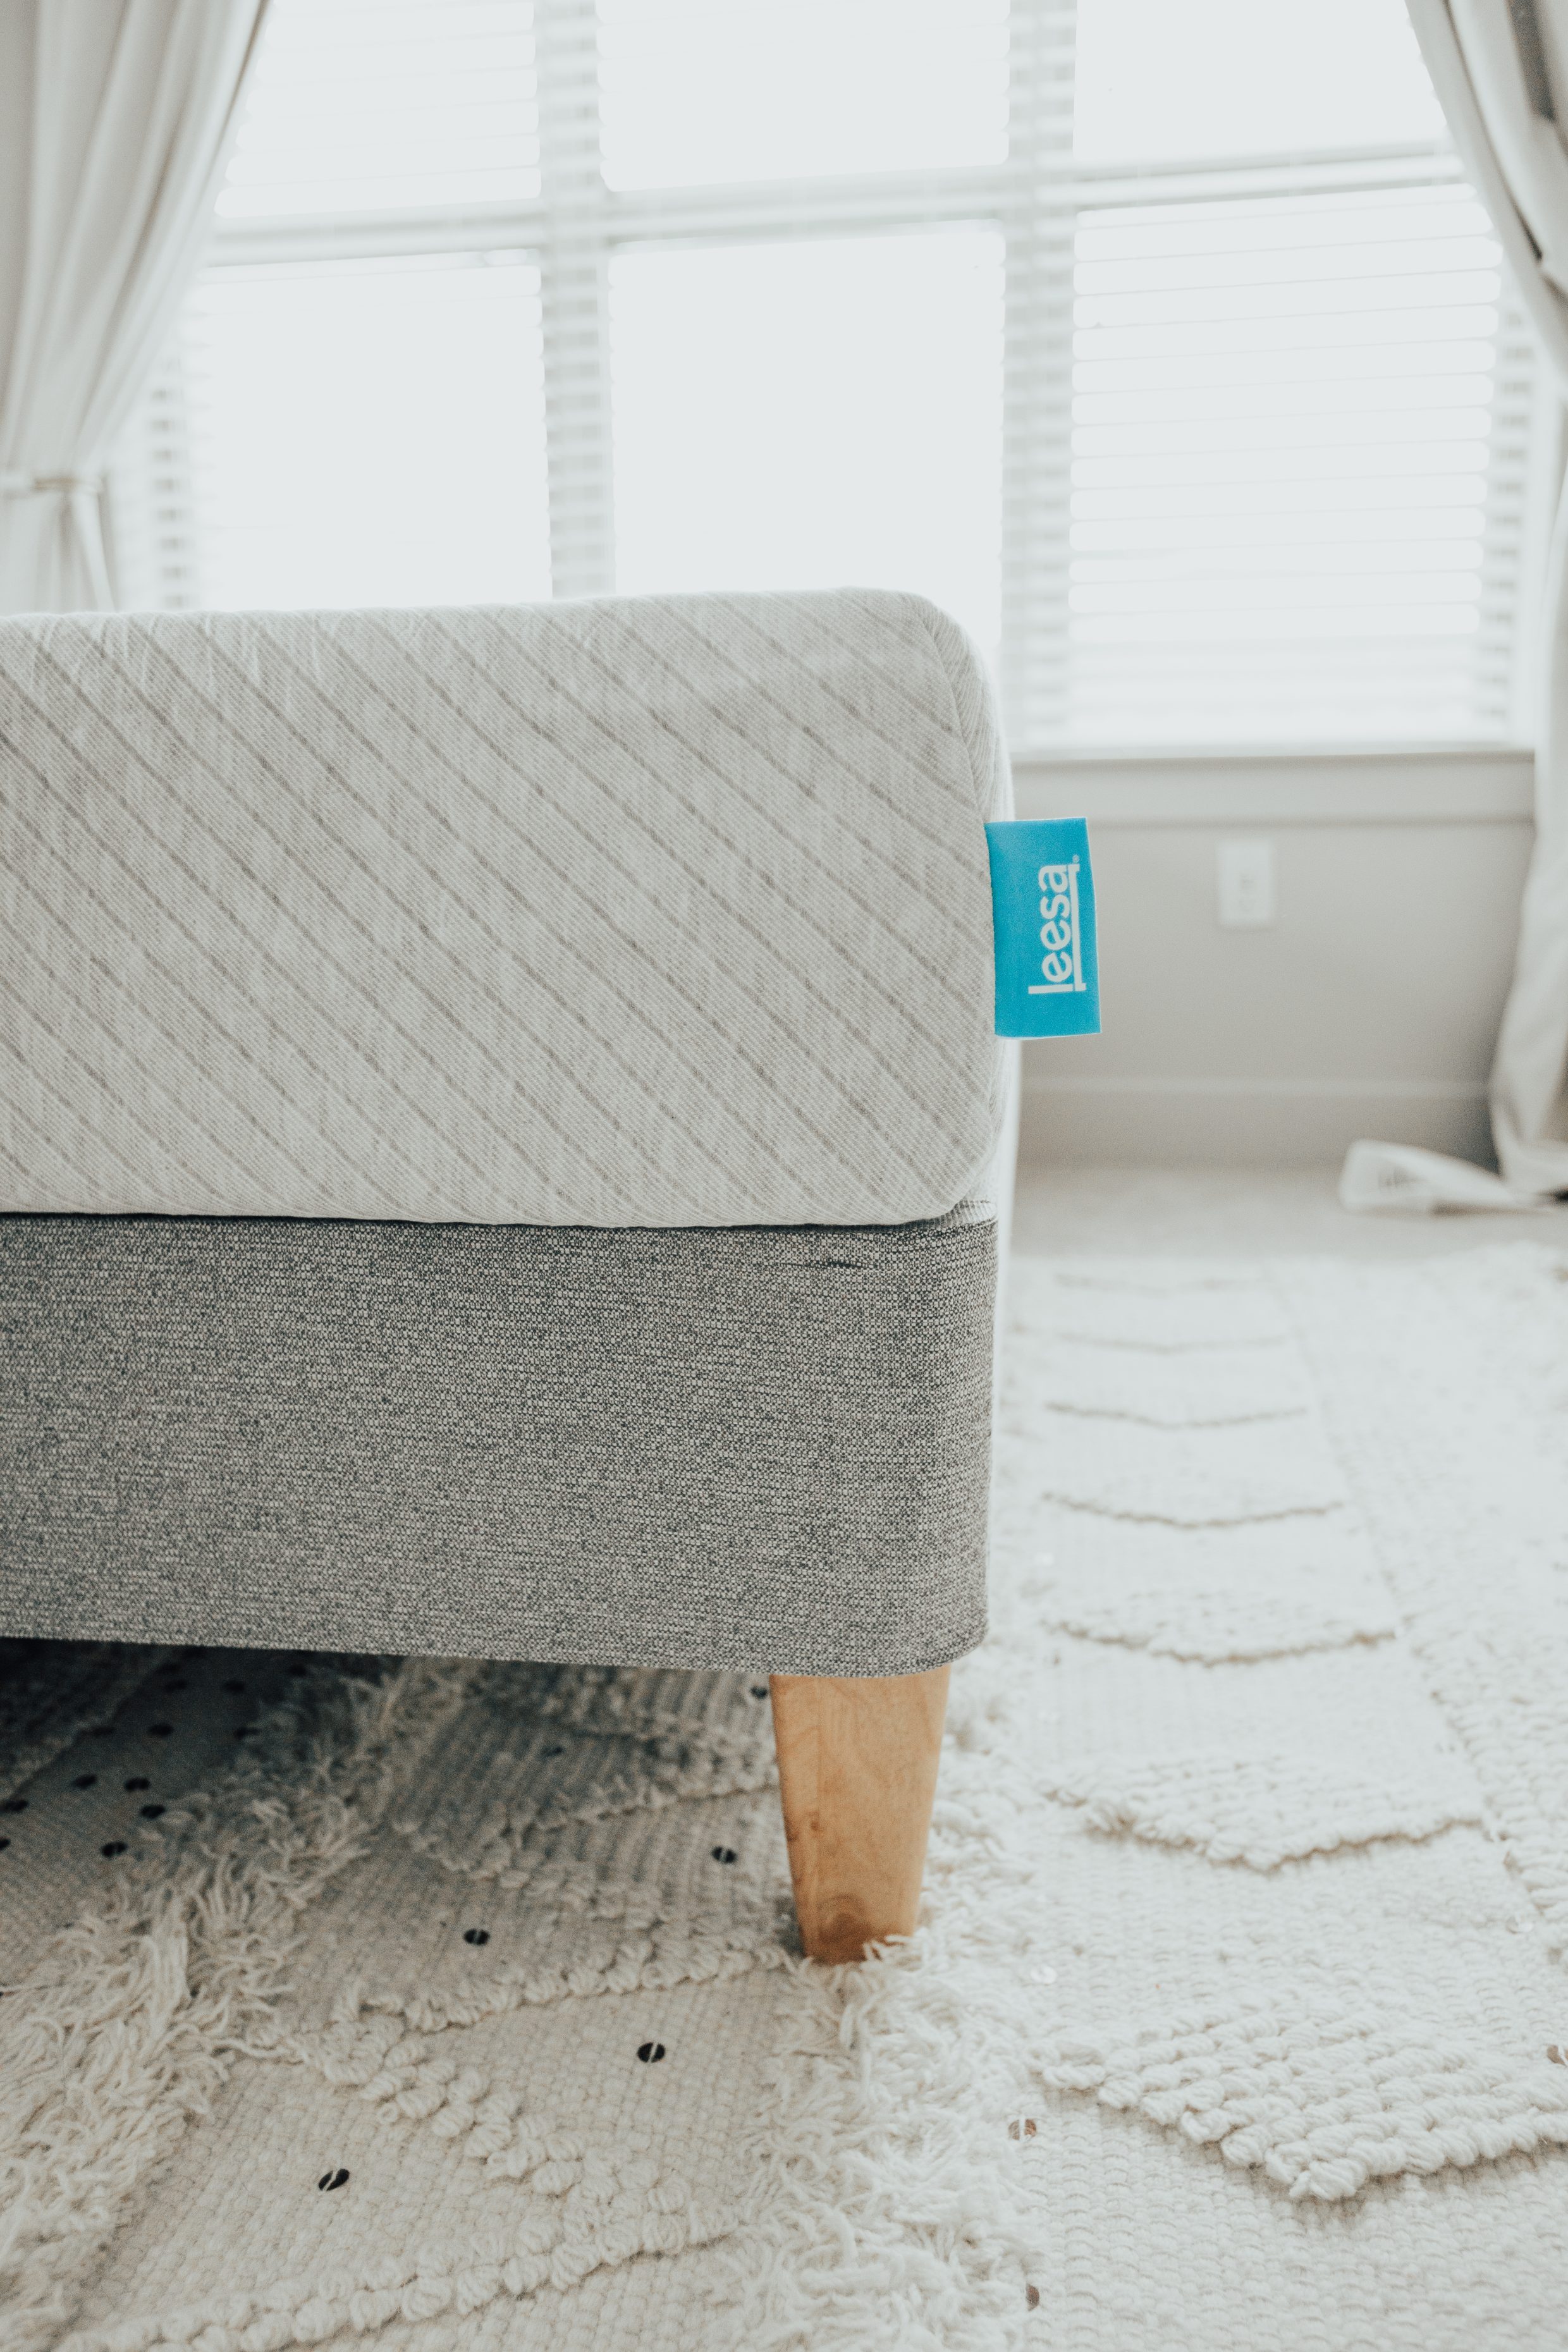 How a Leesa mattress changed everything in our bedroom